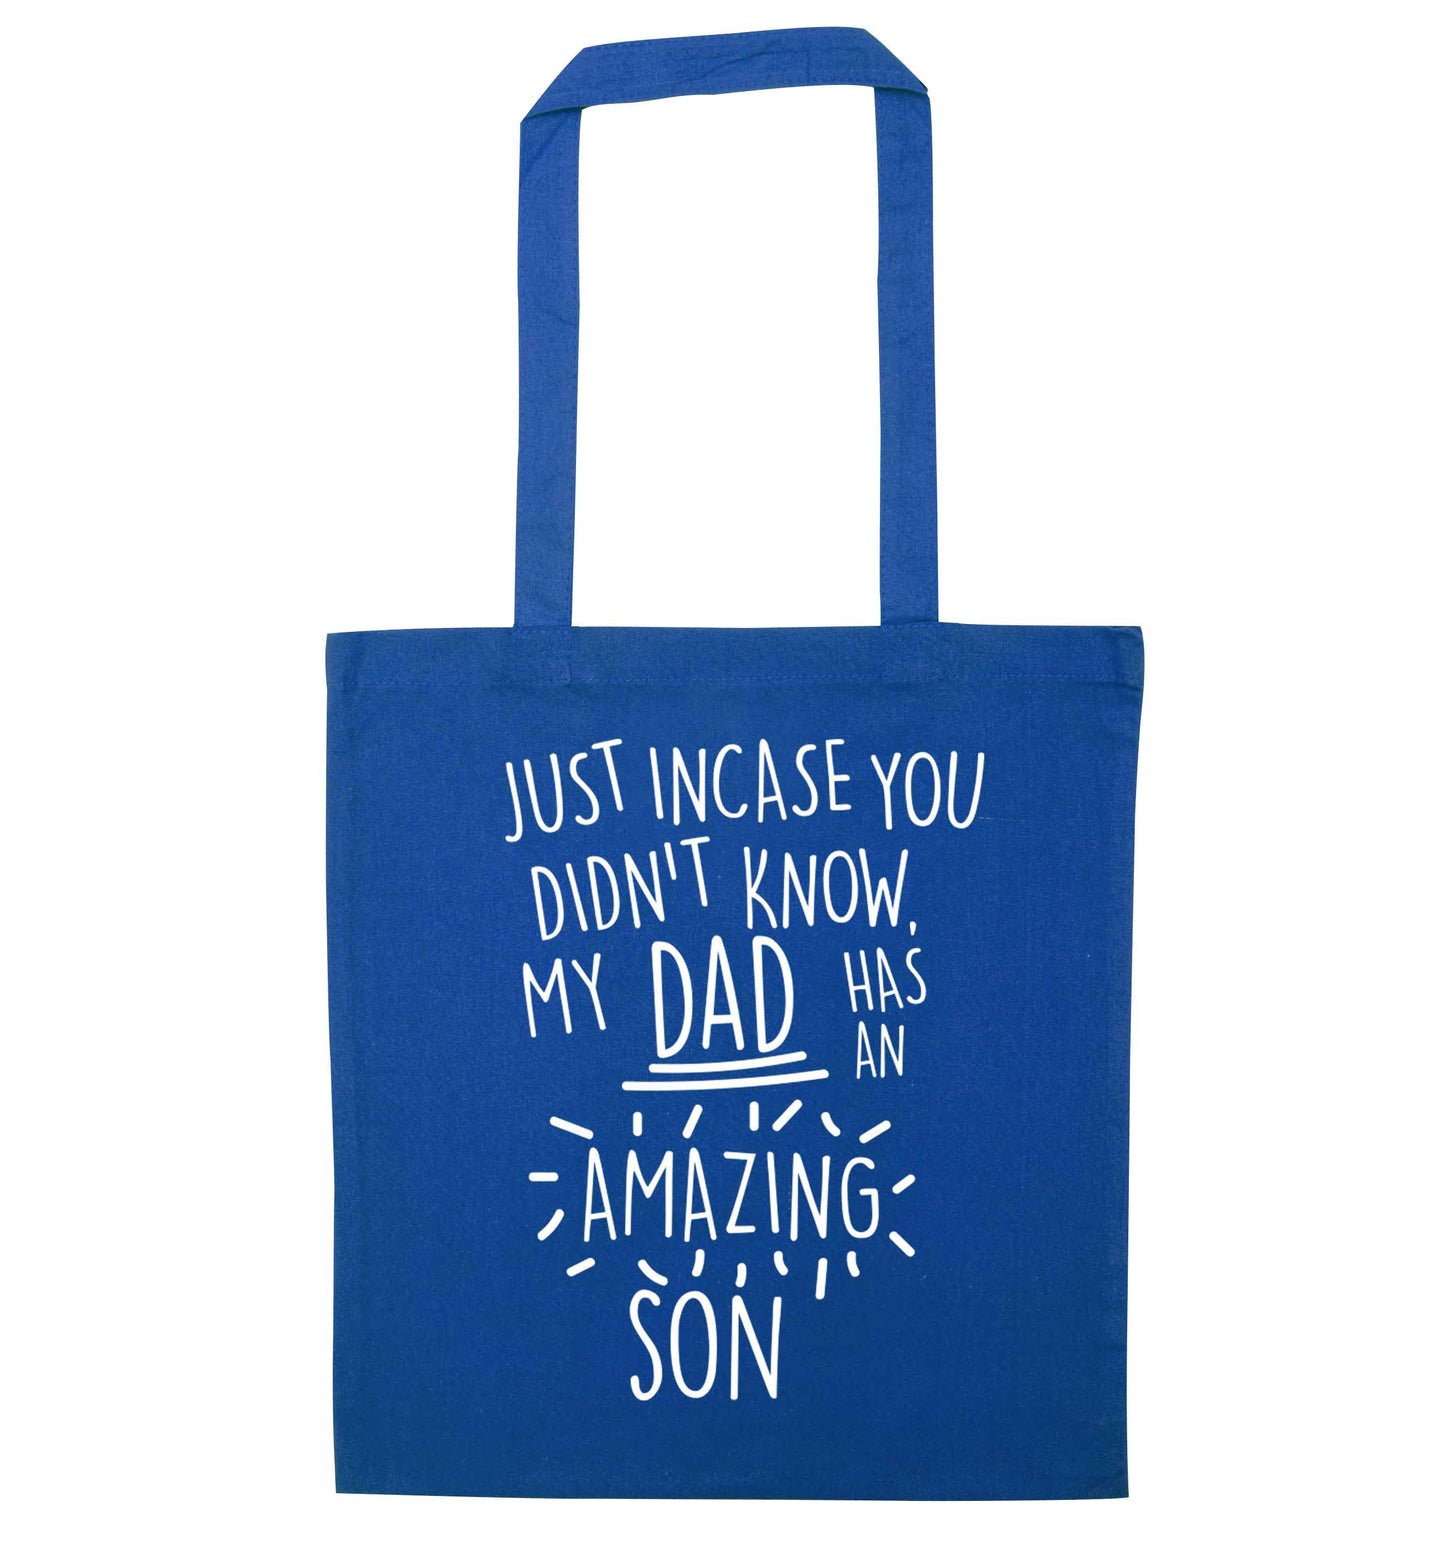 Just incase you didn't know my dad has an amazing son blue tote bag